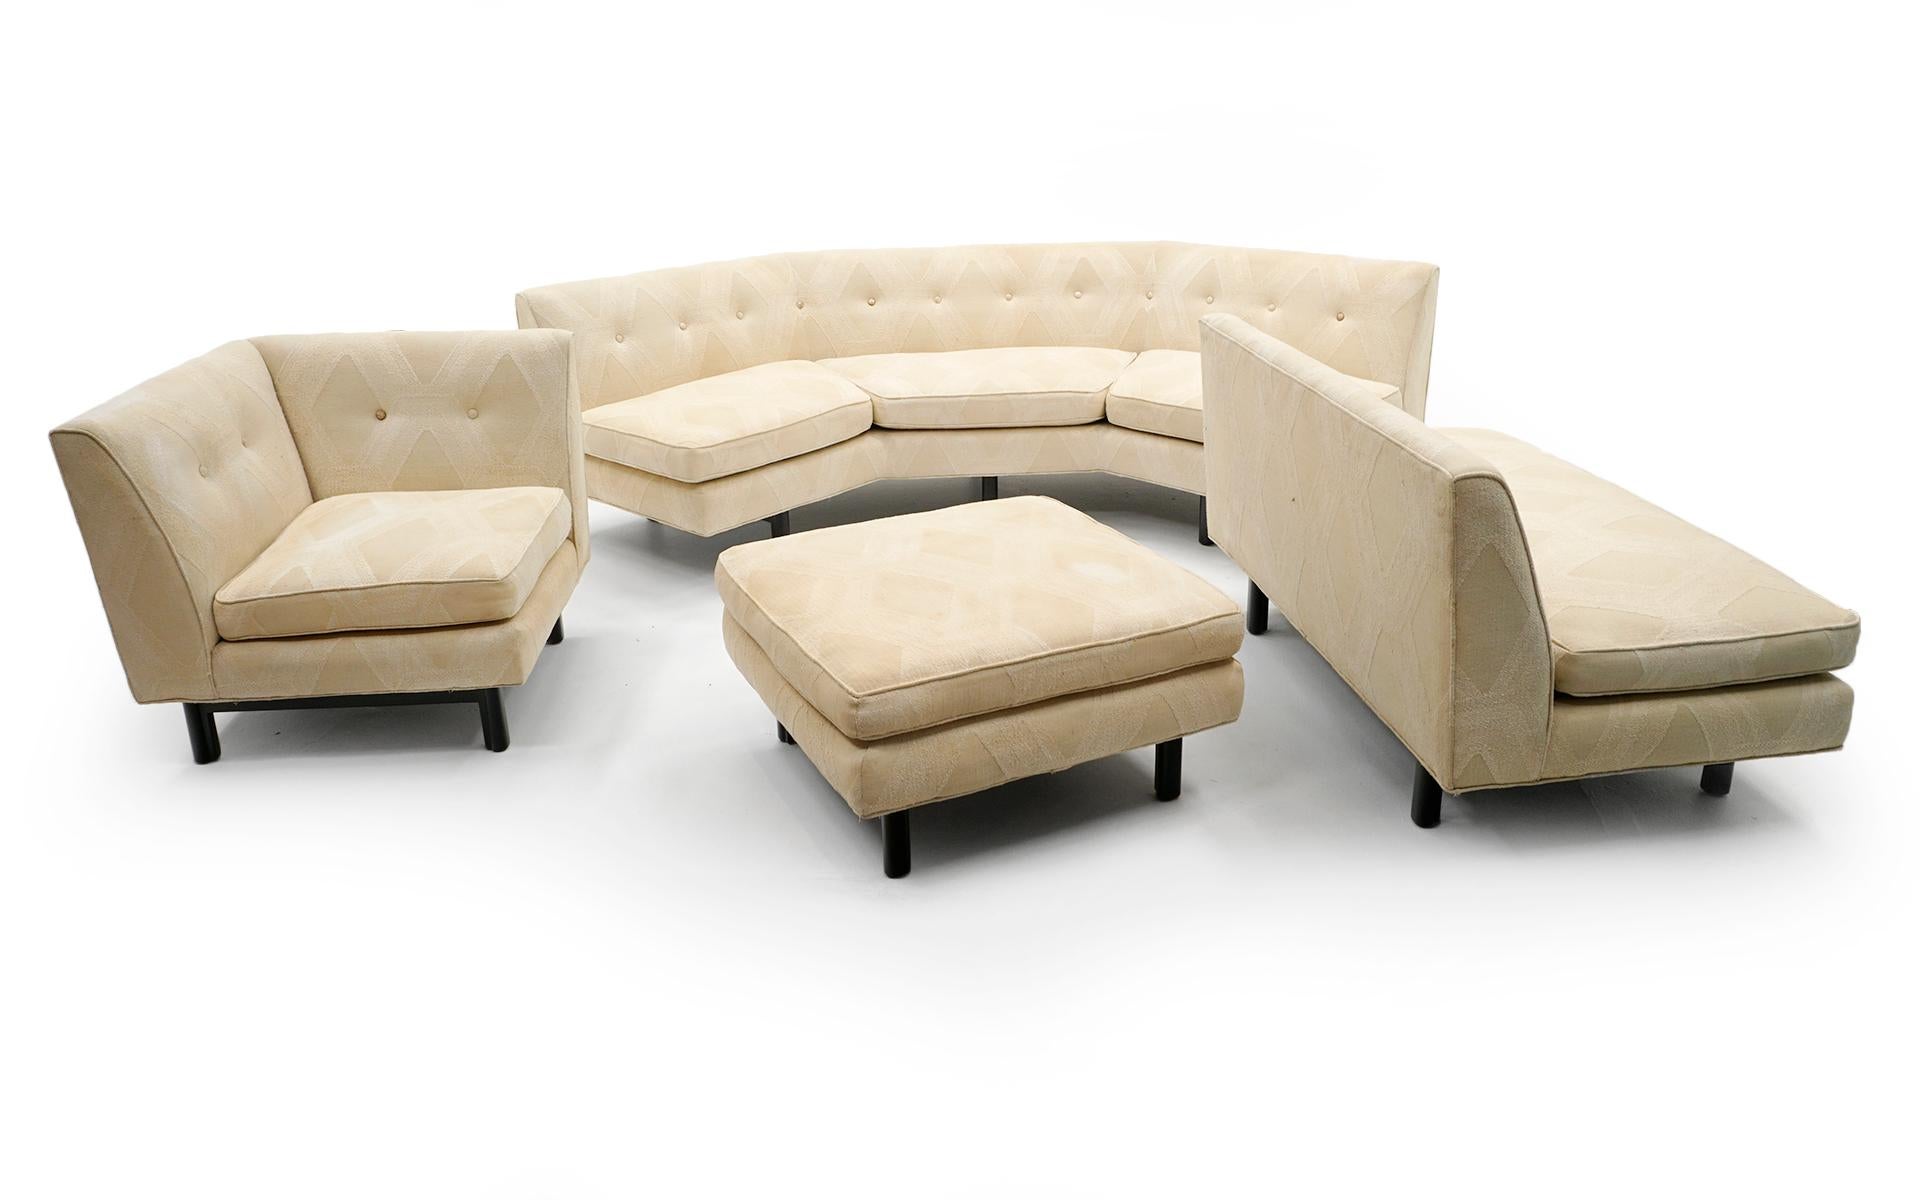 Four piece sectional sofa designed by Edward Wormley for Dunbar, 1950s. Curved center / corner section plus two seat section, one seat section and one ottoman. This can be configured multiple ways with the armed piece on either end. Can also creat a